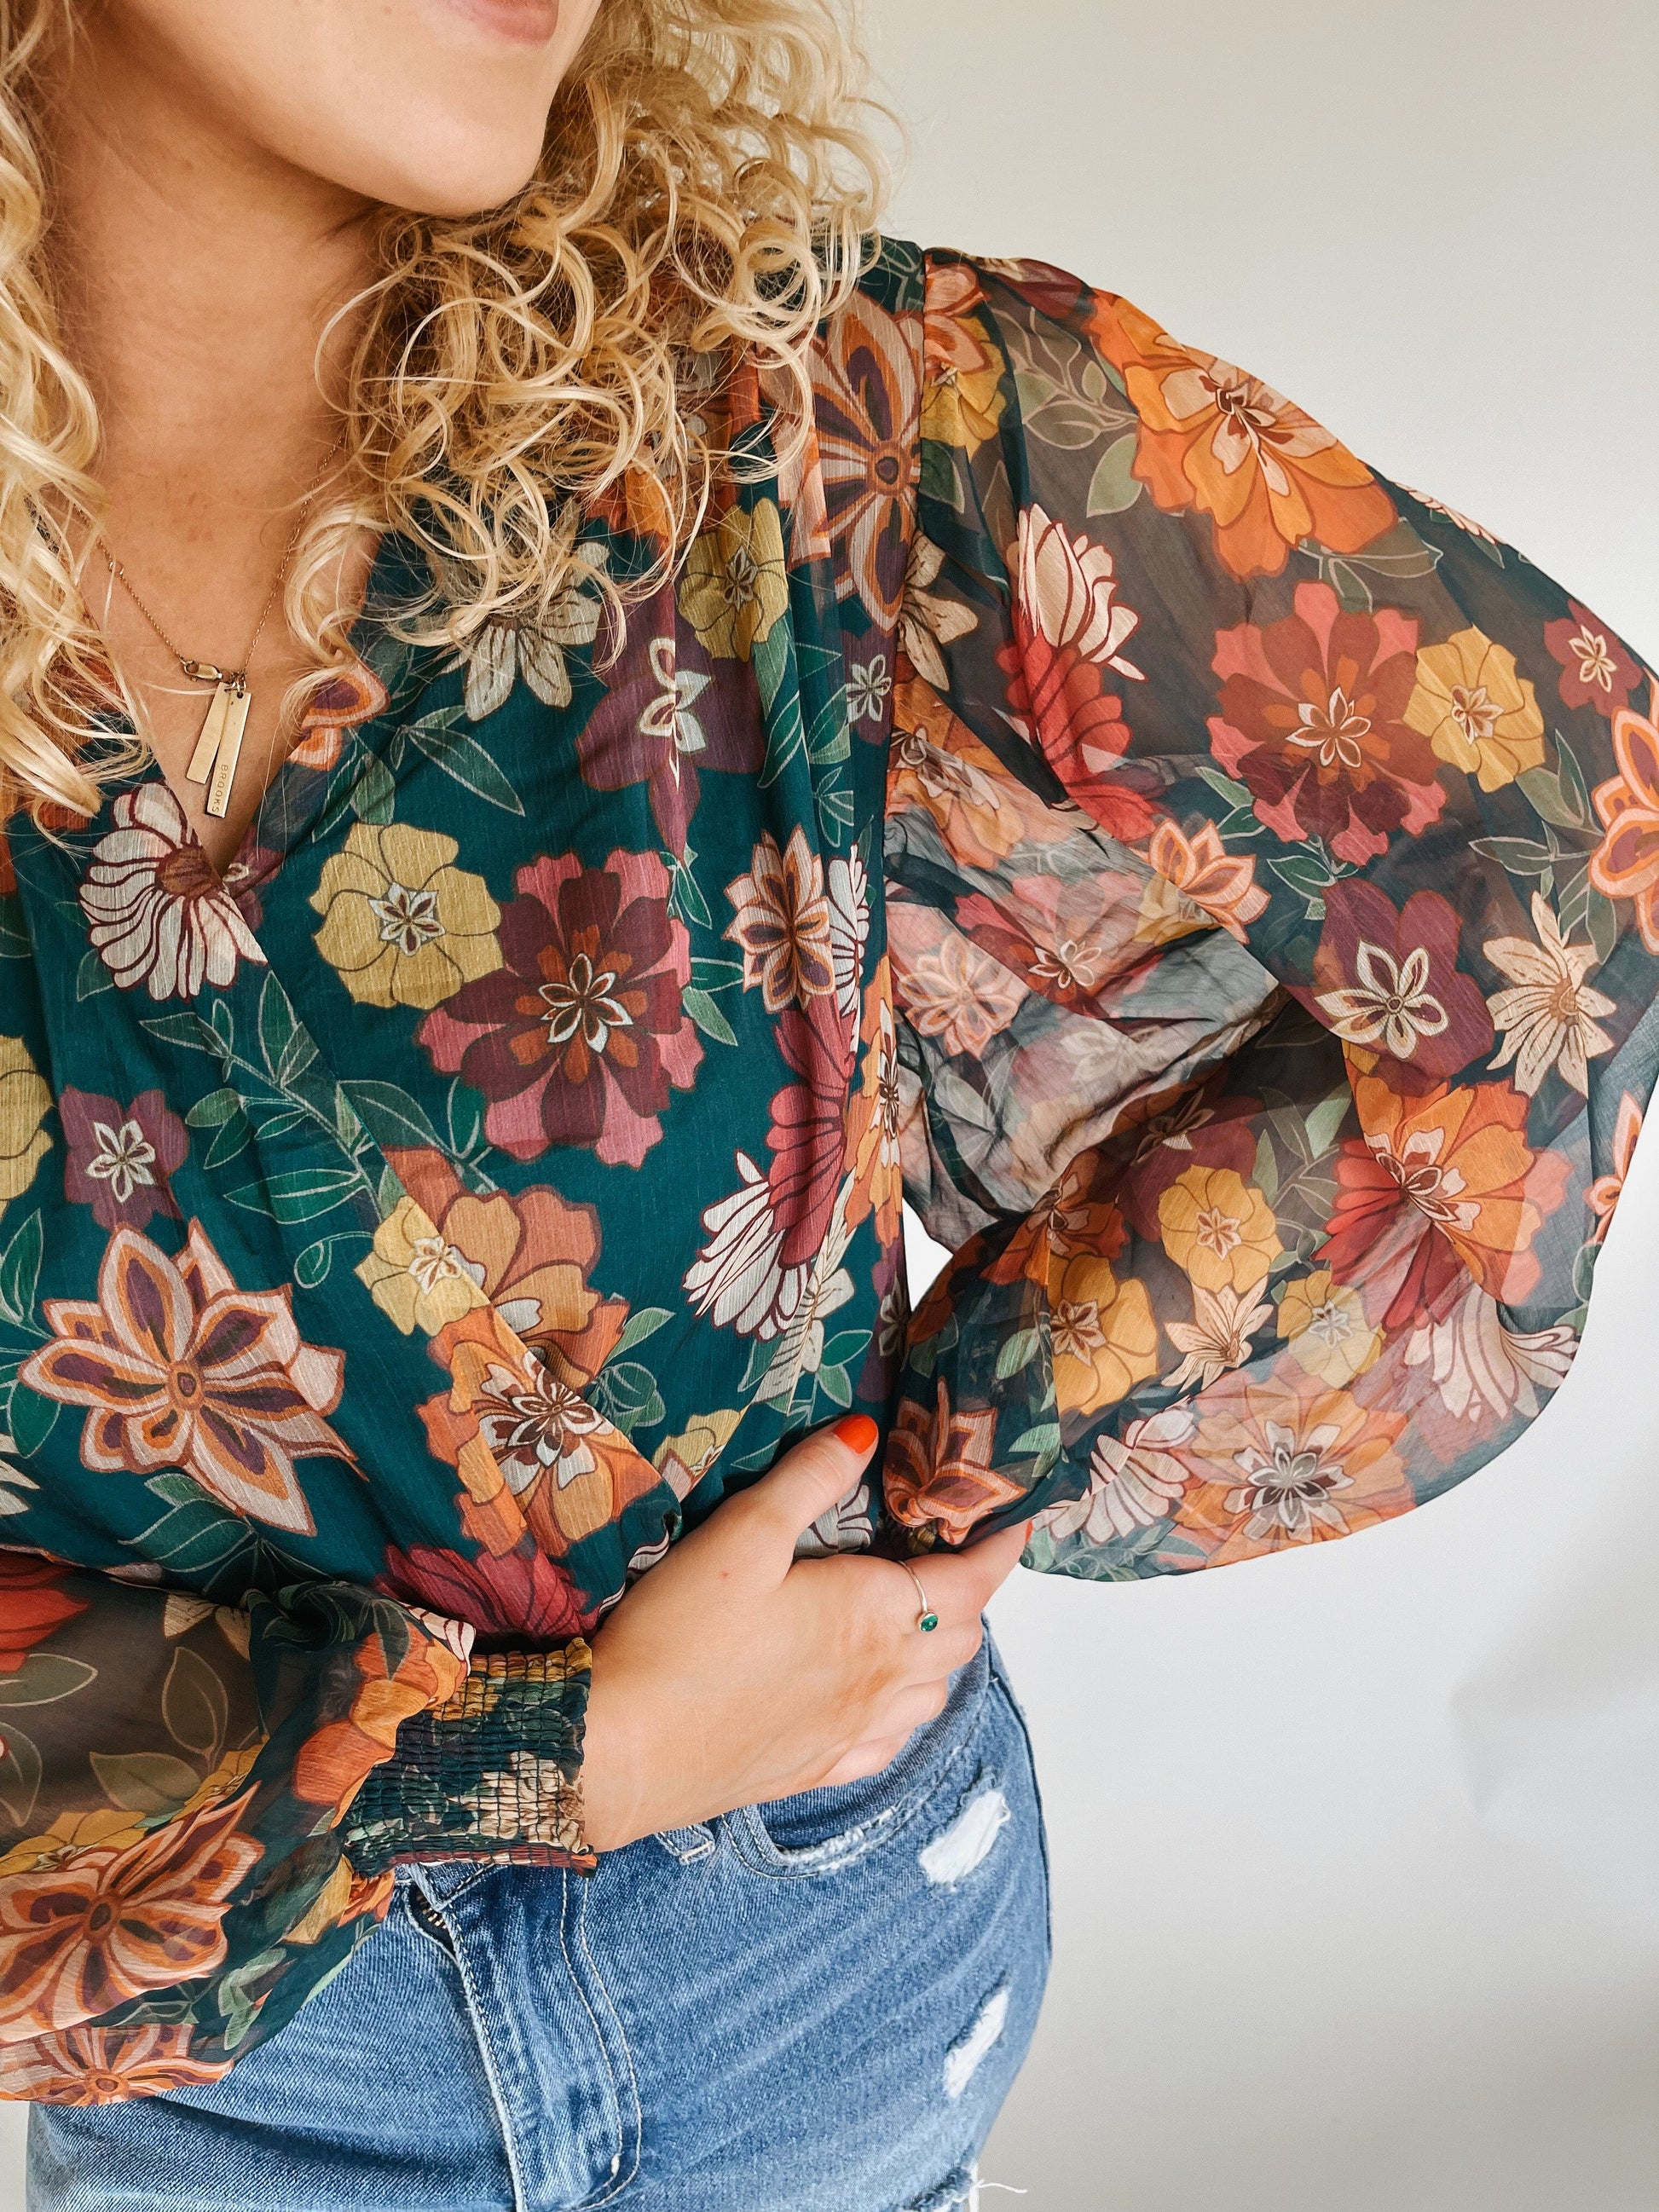 Close-up image of the intricate floral pattern on a green, orange, and red bodysuit with flowy sleeves, showcasing the vibrant colors and delicate details of the design."